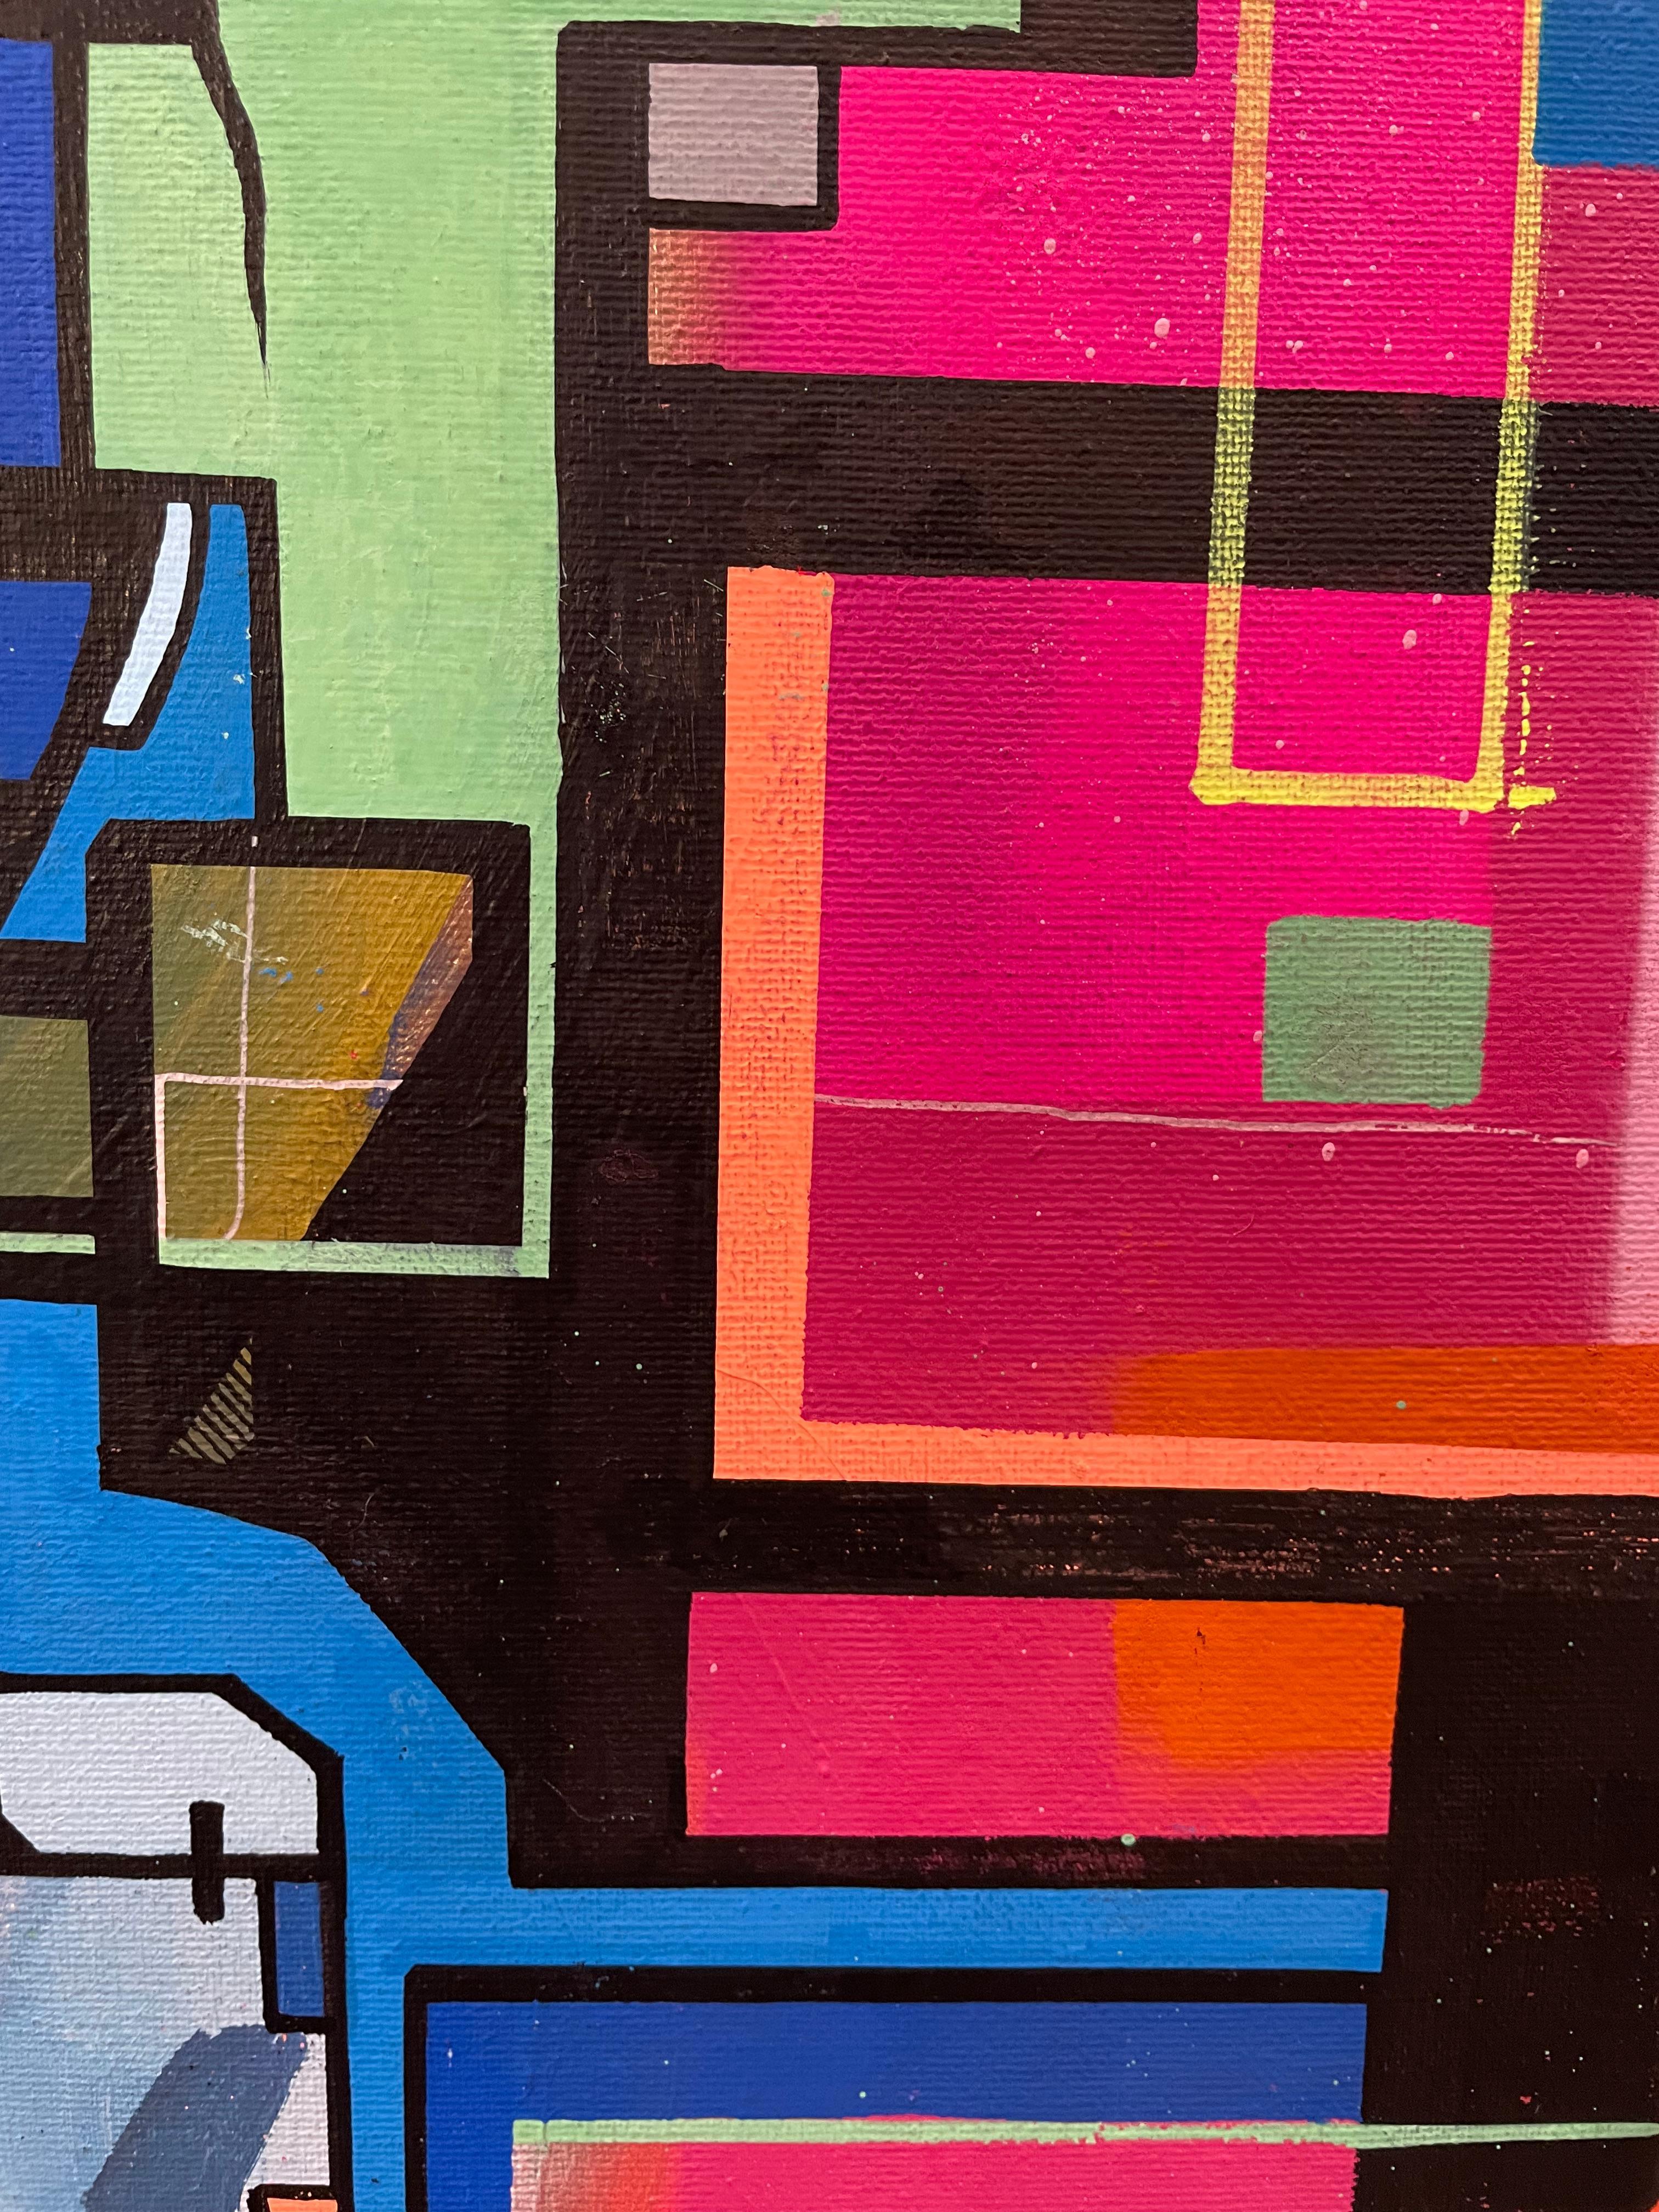 Artist: Ian Sullivan
Title: TESS
Size: 20 x 16 inches
Medium: Acrylic, Spray paint and Ink on canvas
Unframed

Moody colors and geometric lines dominate this figurative/abstract, street-inspired painting by Ian Sullivan. 